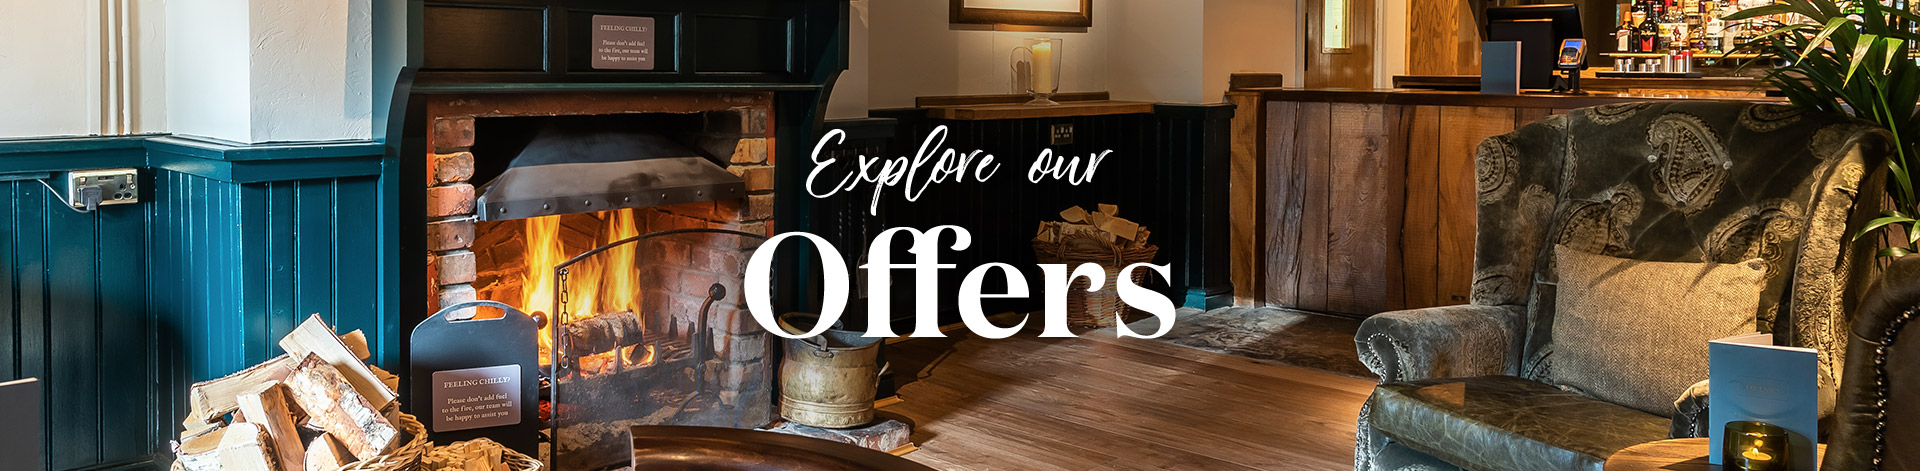 Our latest offers at The Park Gate Inn